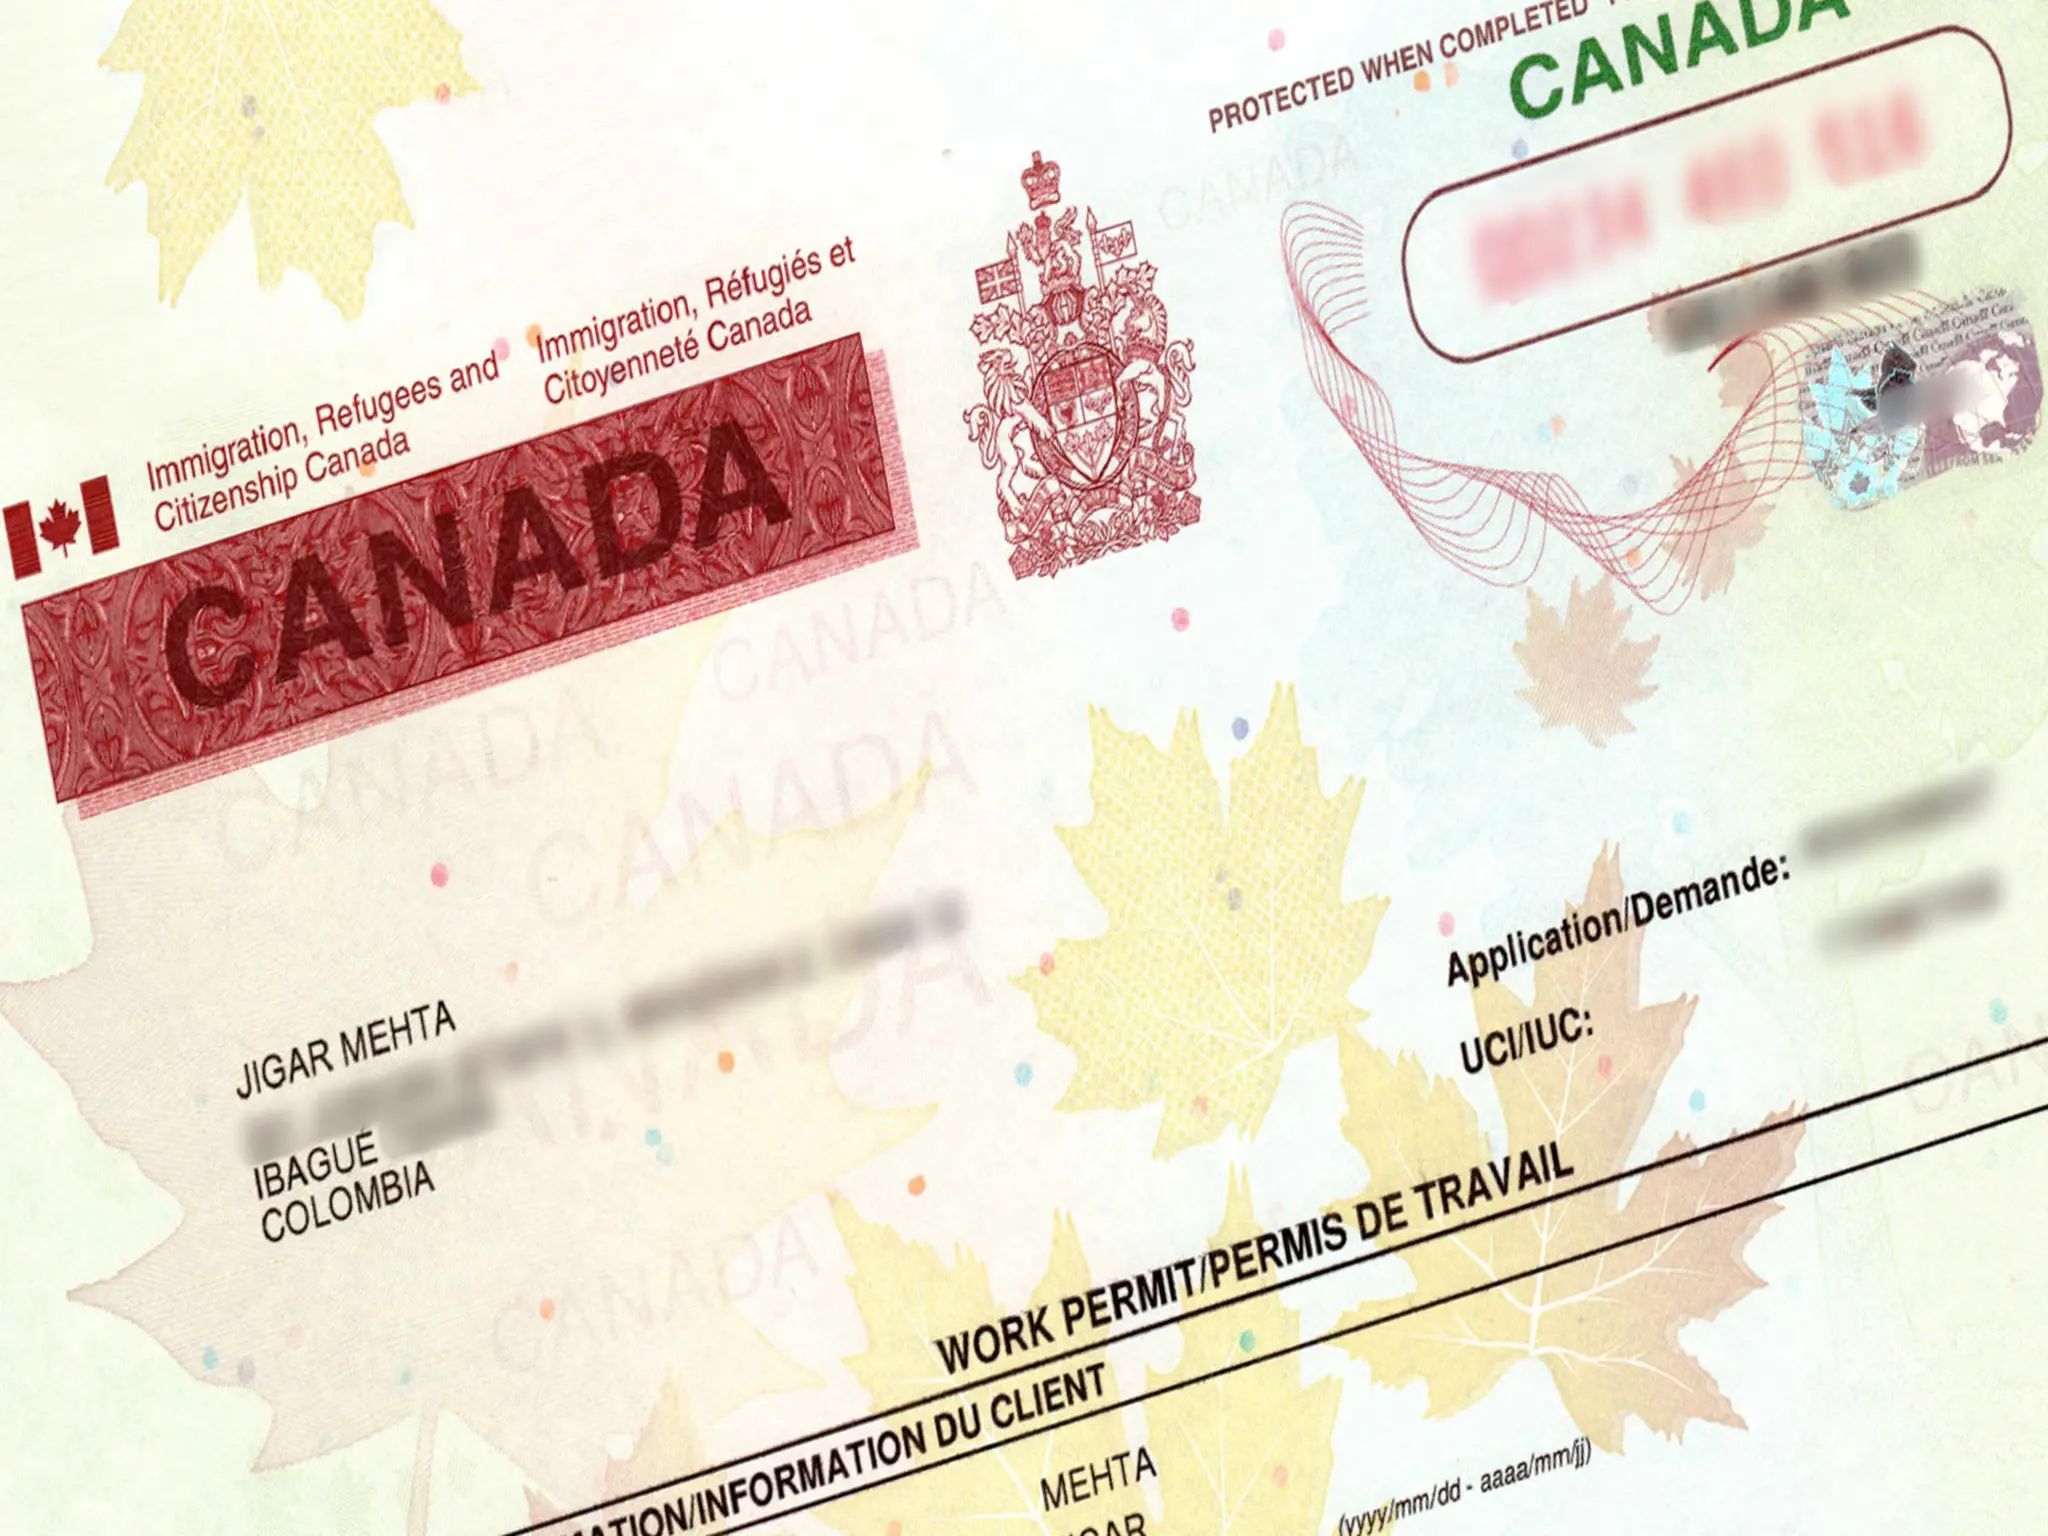 Canada determines when a Canadian work permit is needed